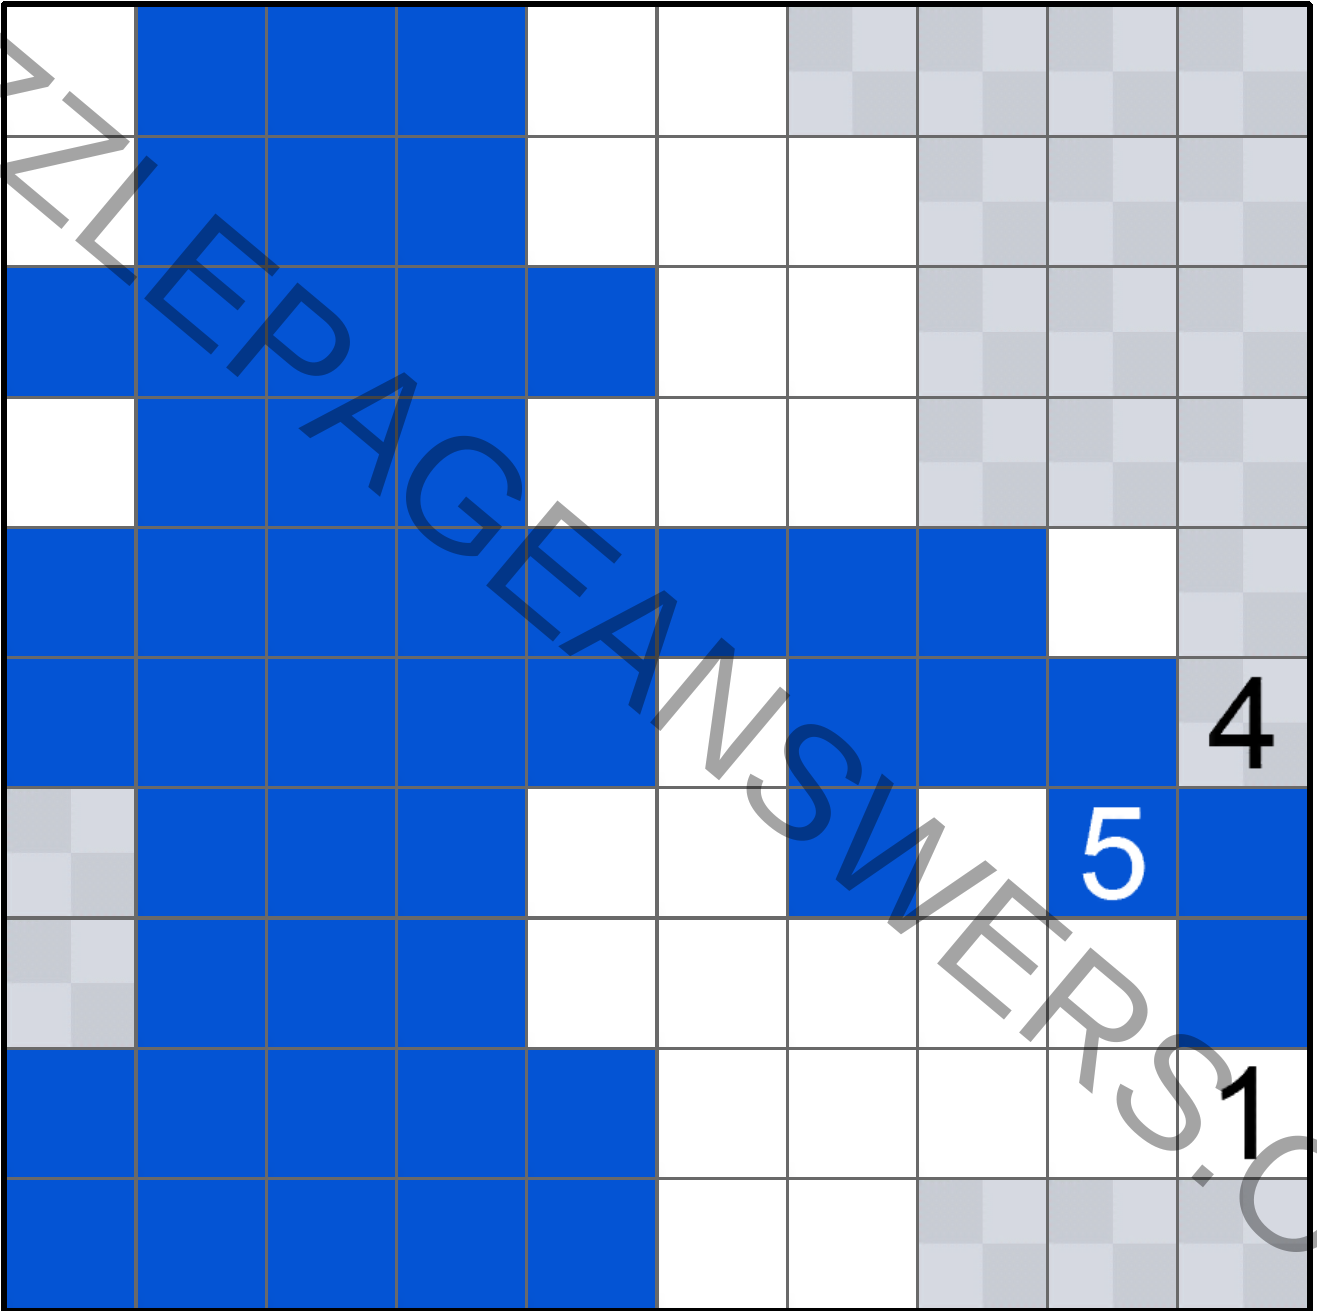 field involving grids but not clues